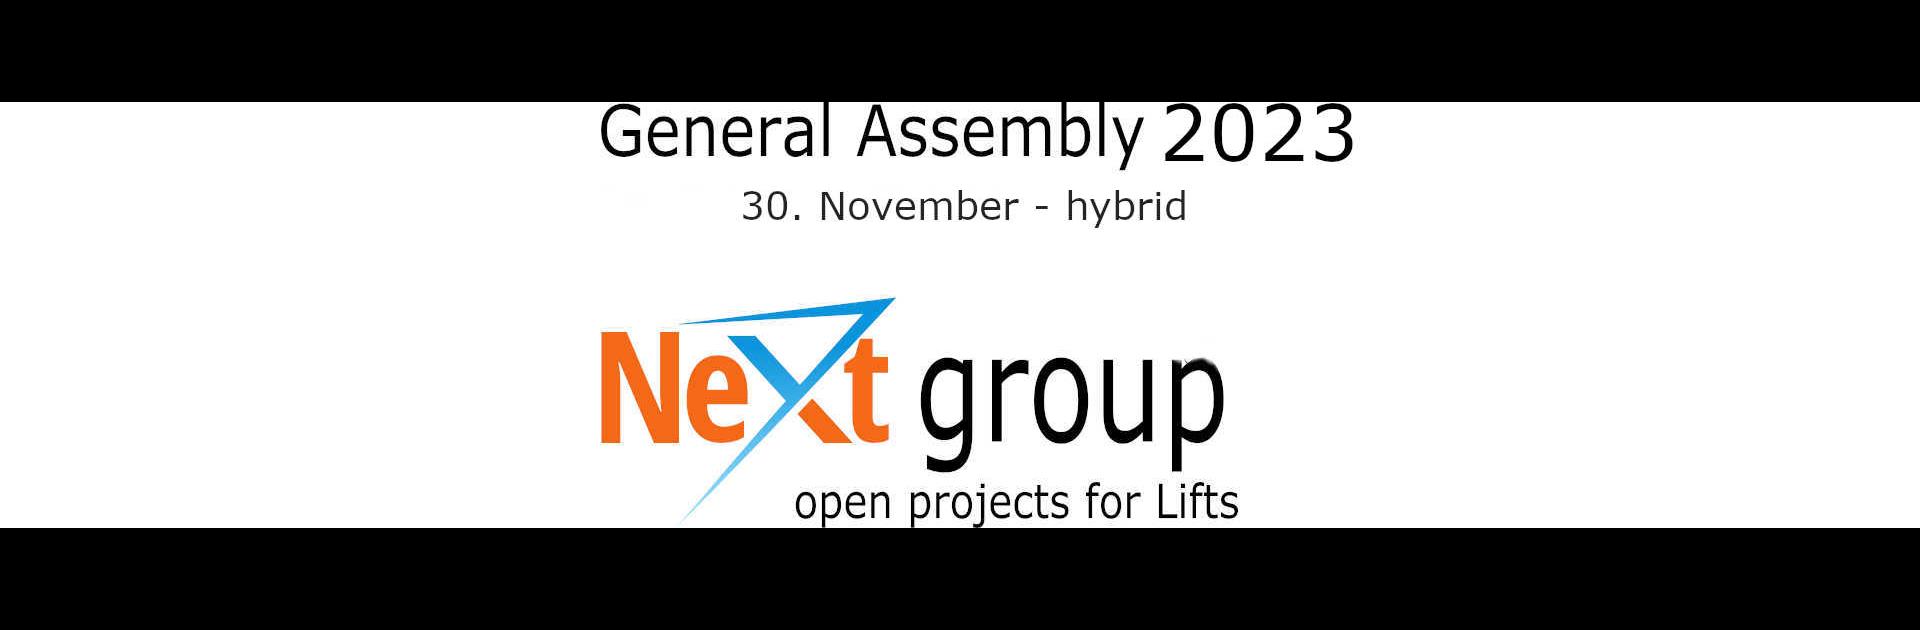 NeXt group general assembly 2023